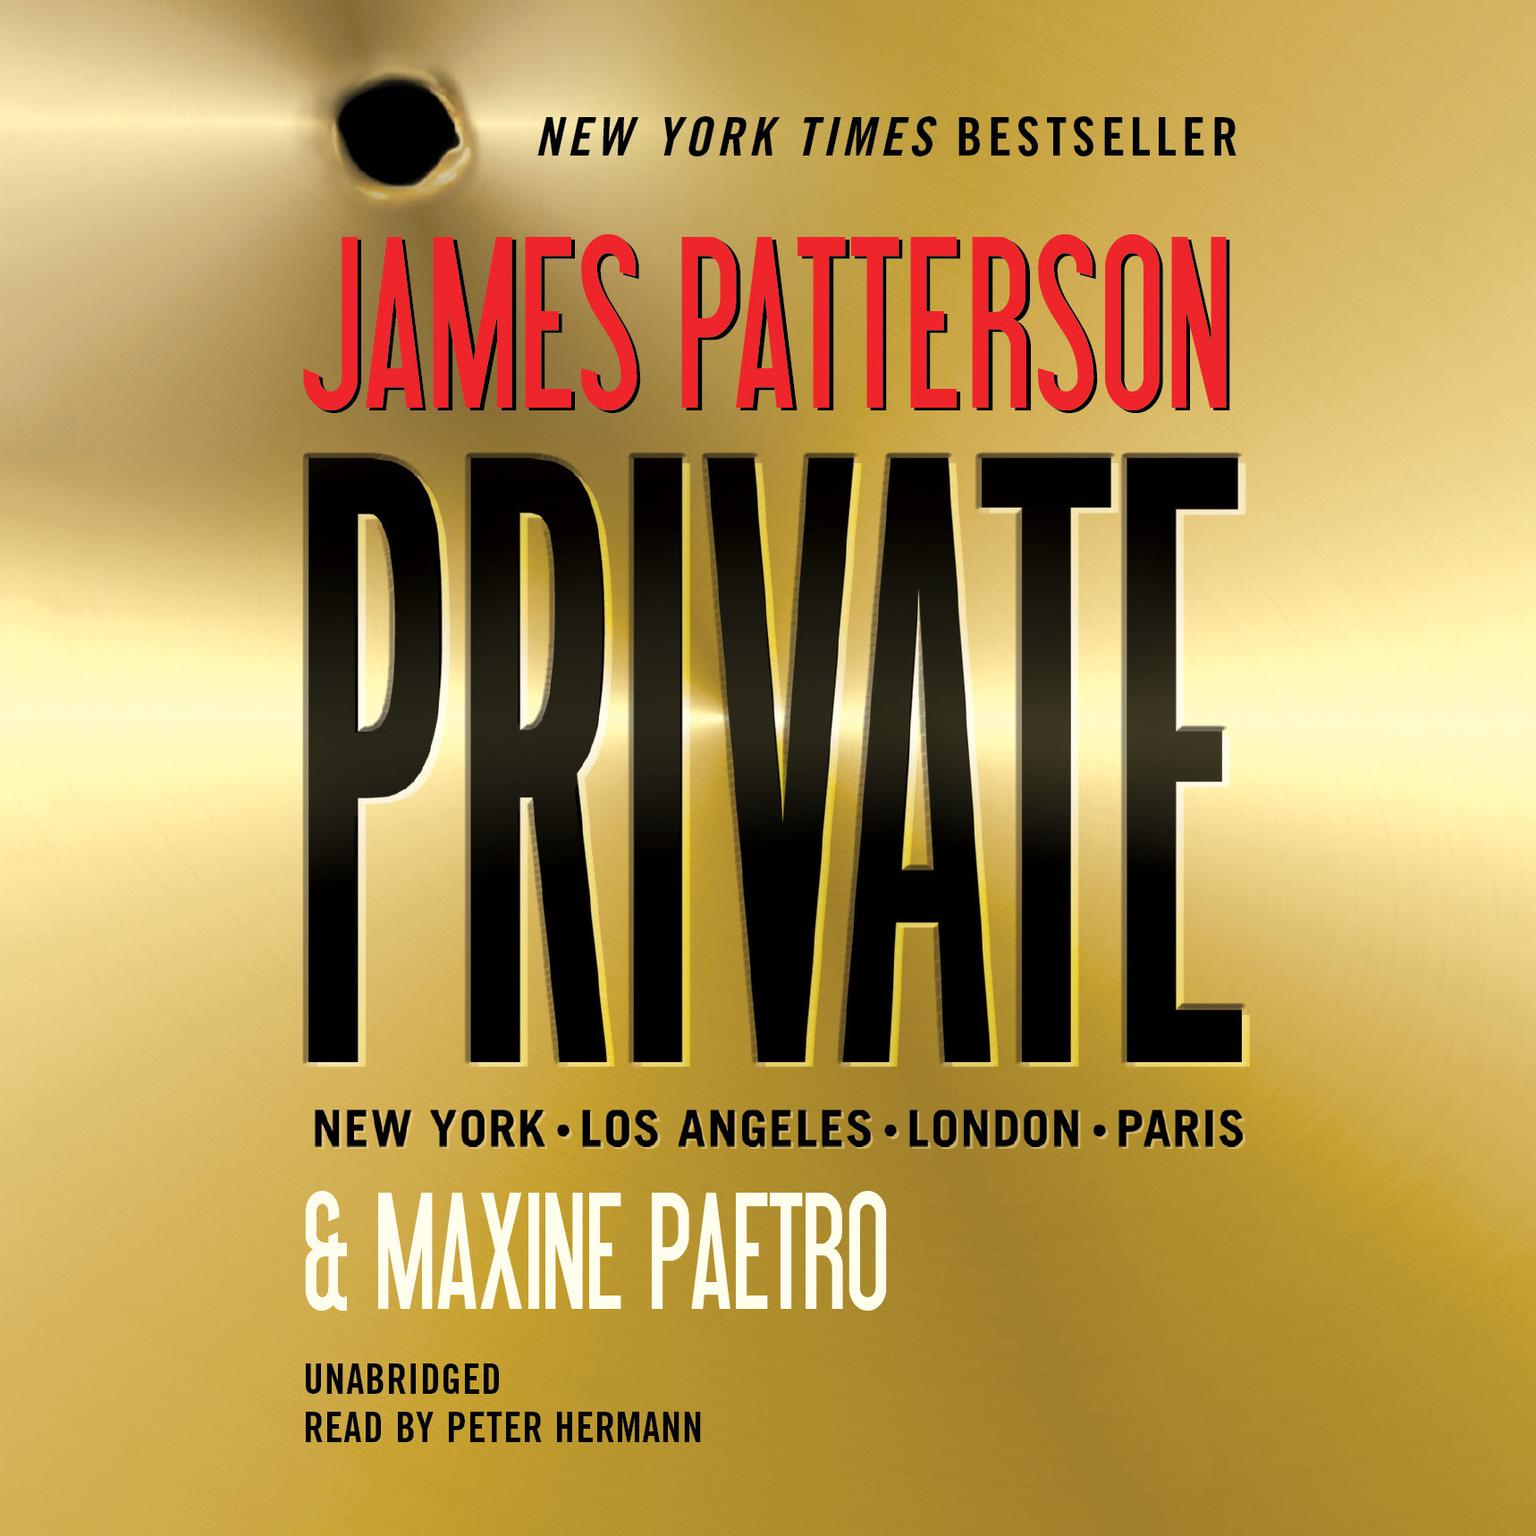 Private Audiobook, by James Patterson